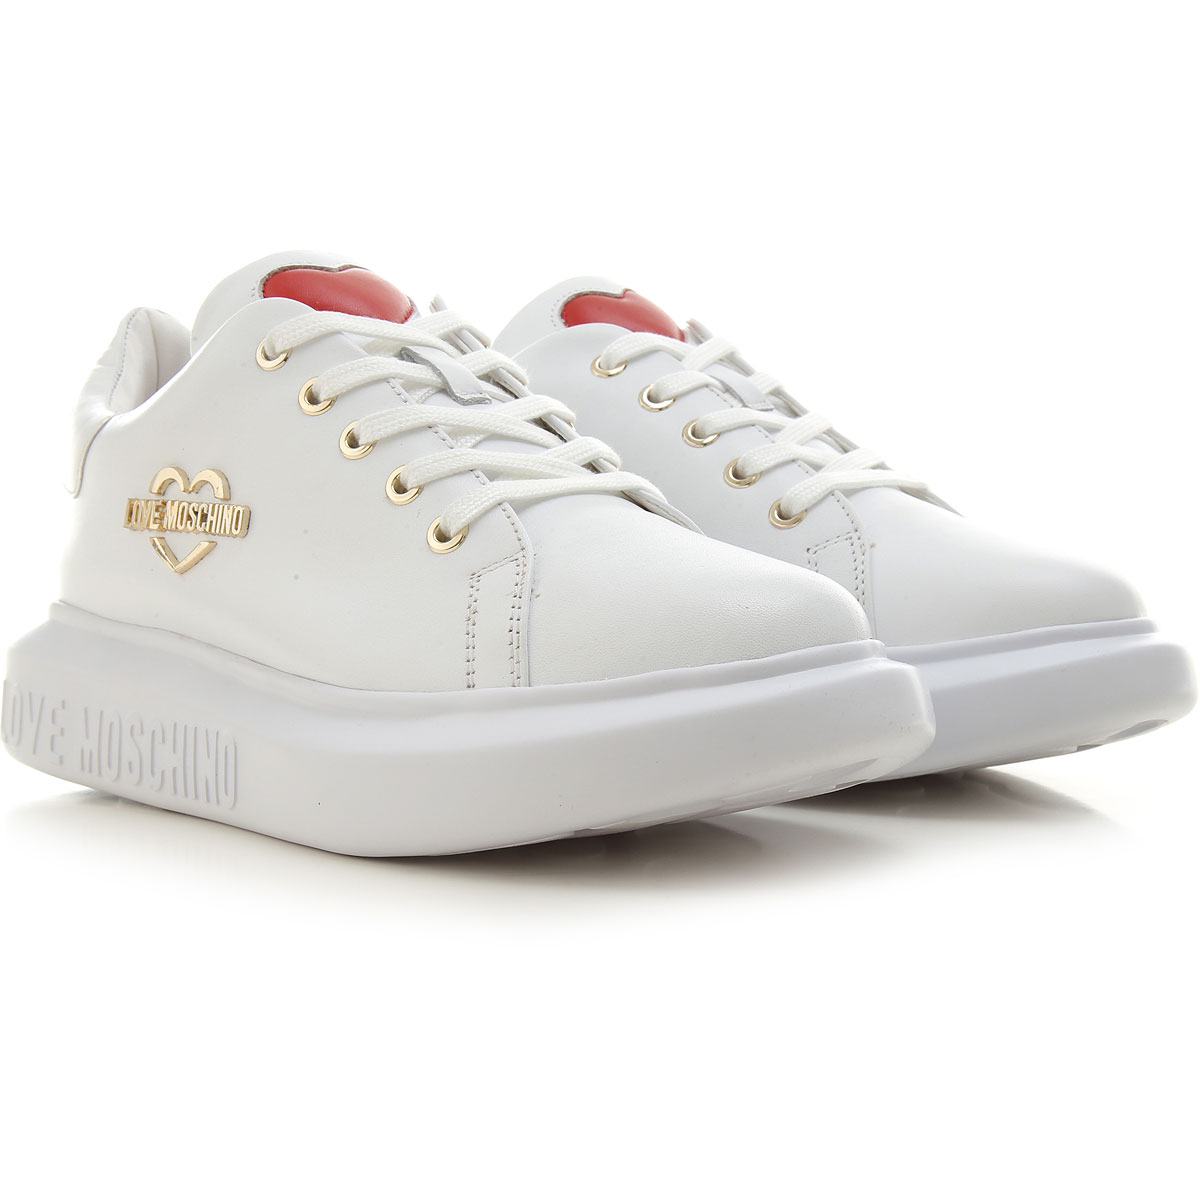 Womens Shoes Moschino, Style code: ja15204g1cia0100--